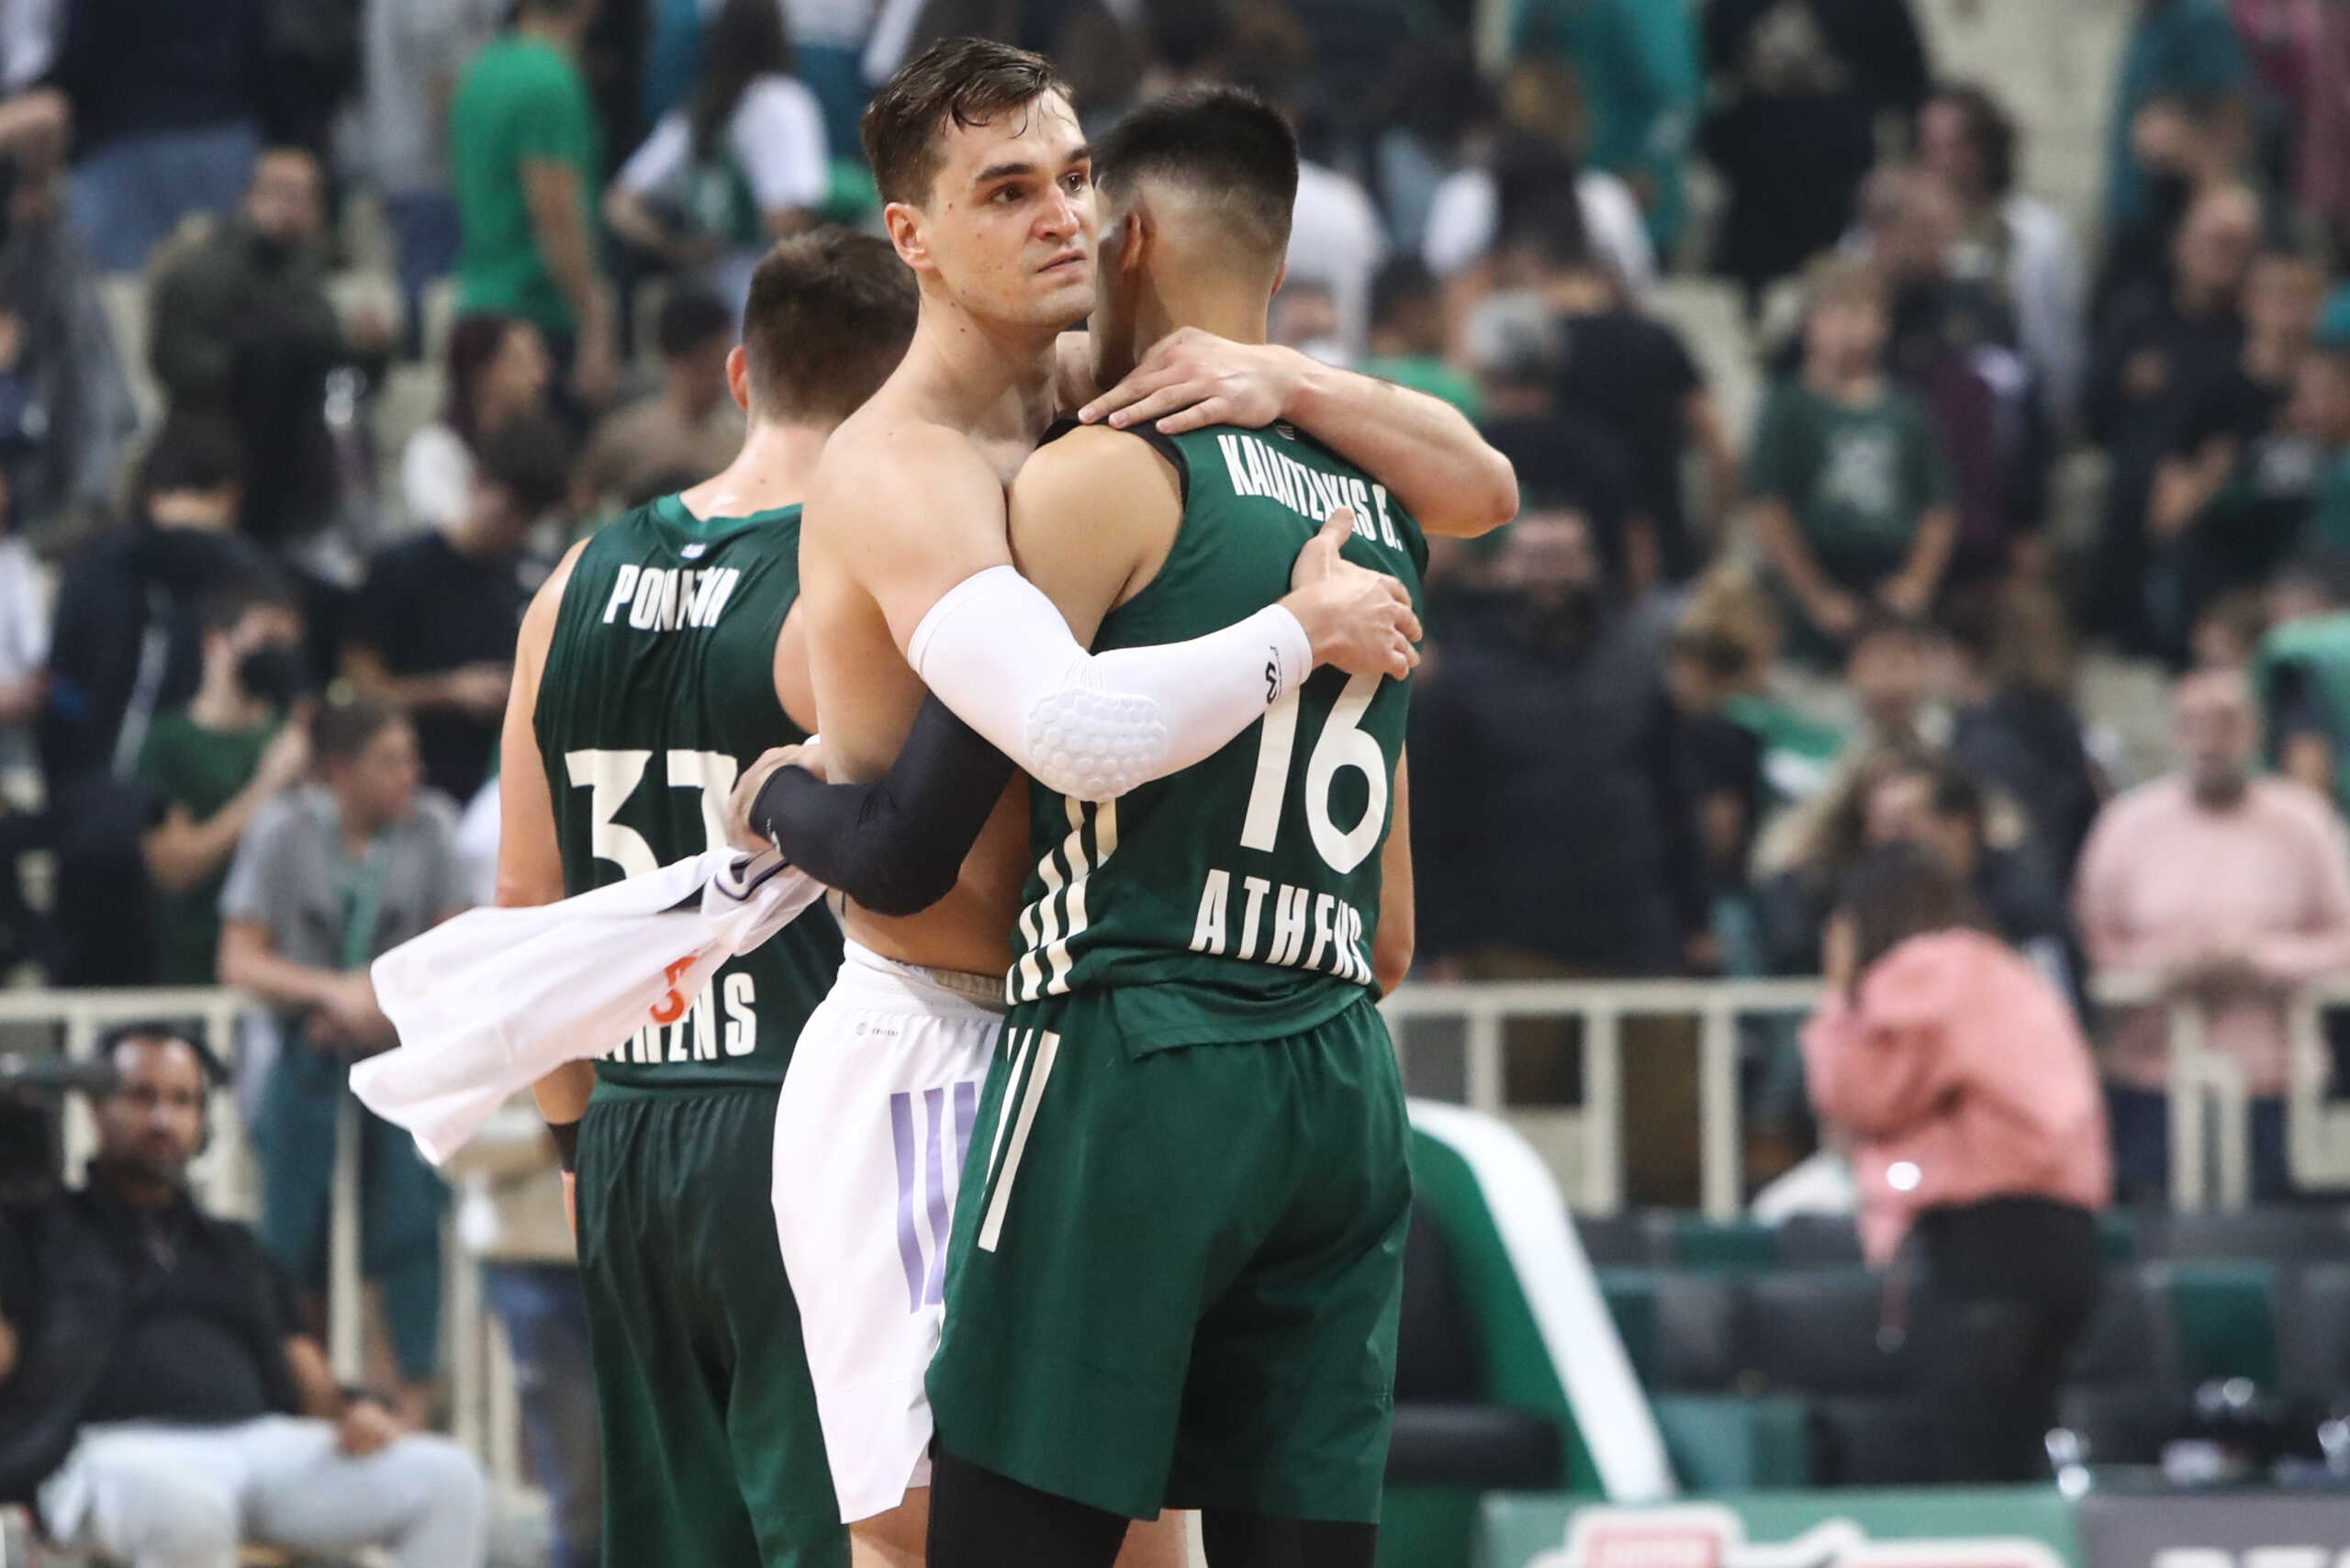 Real Madrid – Panathinaikos, live broadcast, round 27 of the Euroleague